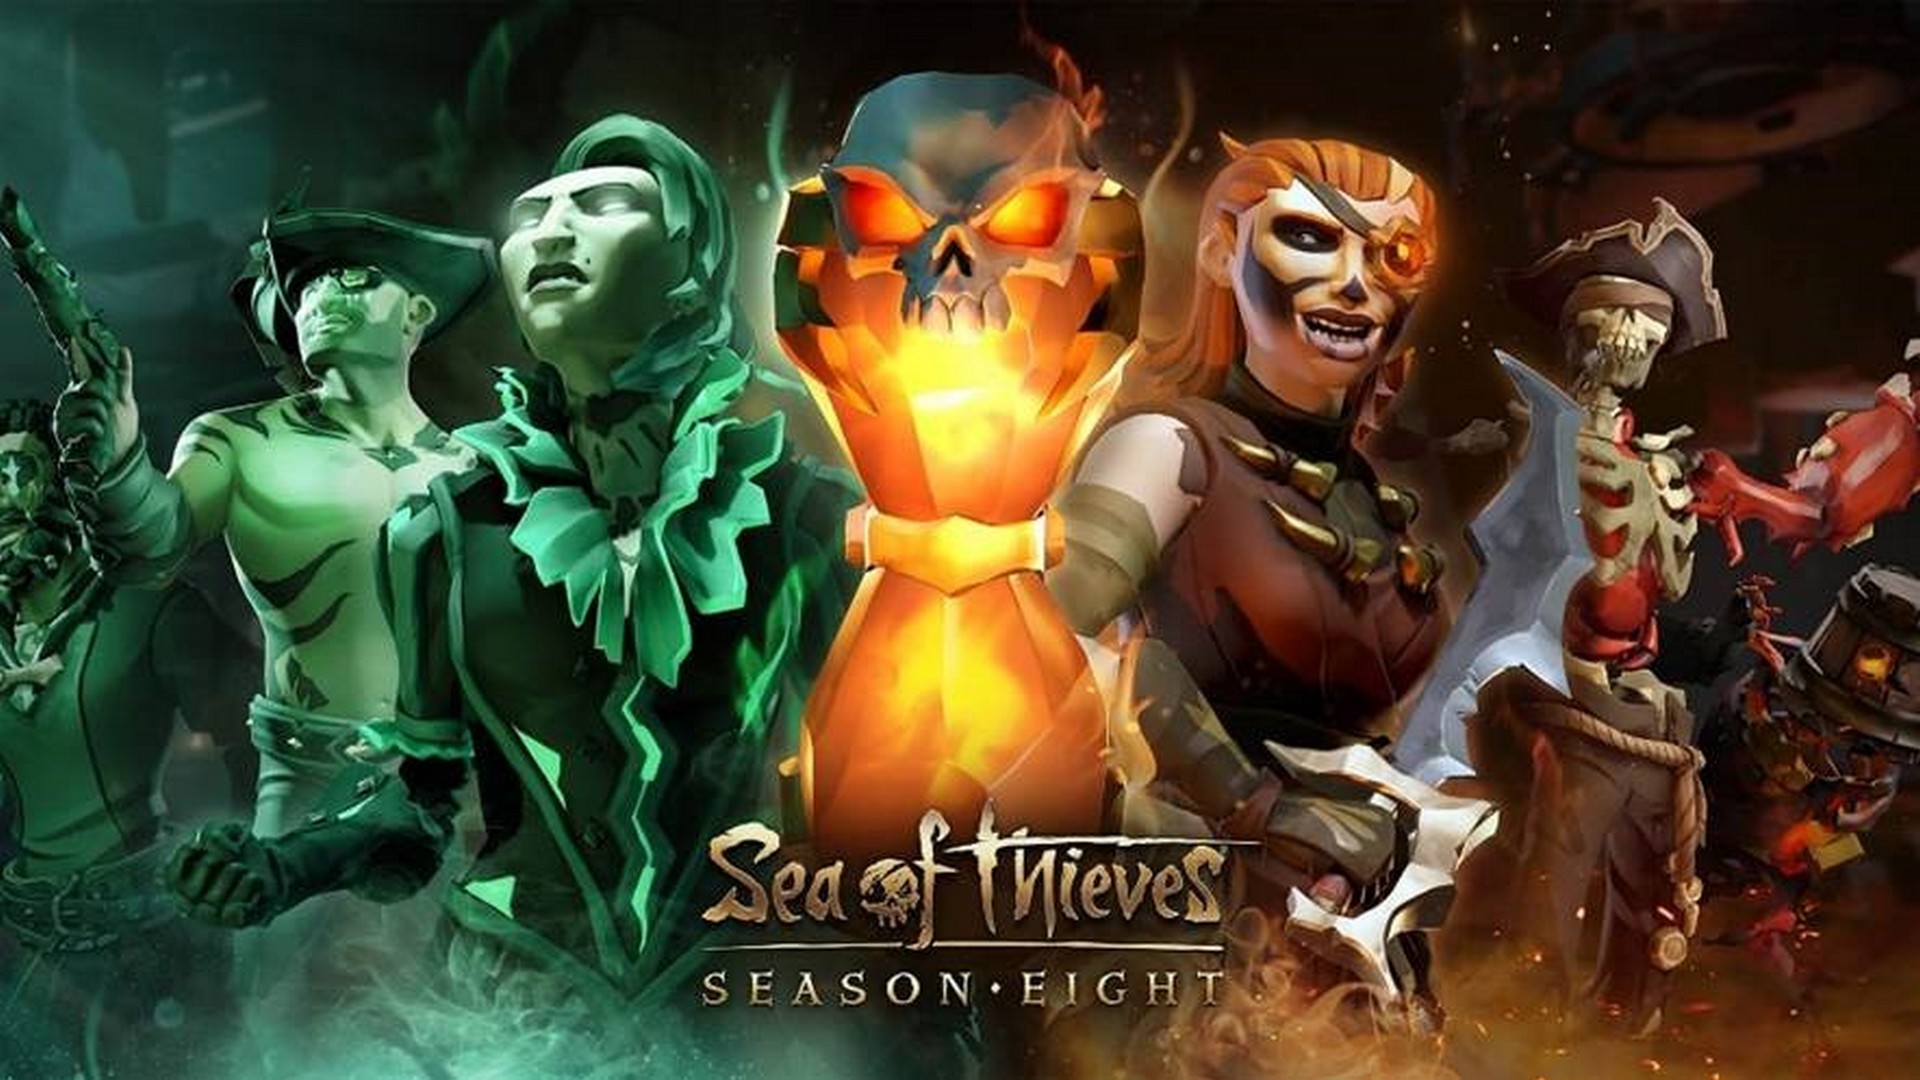 Sea of Thieves Season 8 Available Now